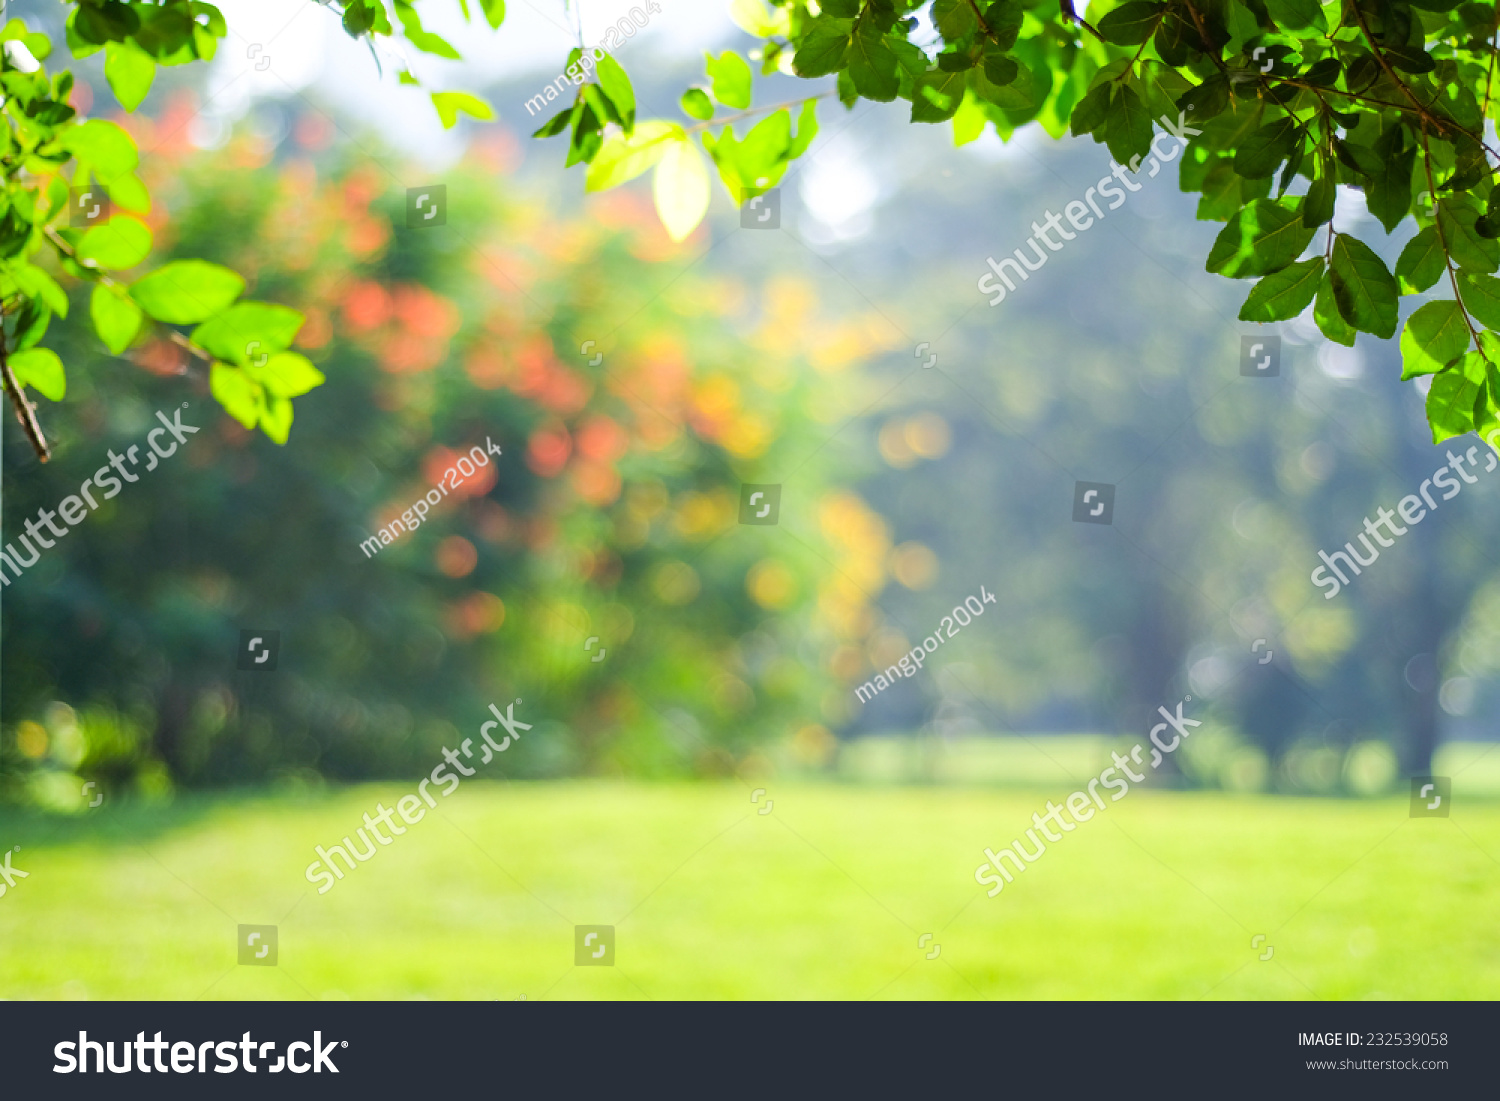 Blur garden tree nature background with bokeh light, Blurred spring green garden, park in spring and summer, Blur nature outdoor abstract background #232539058